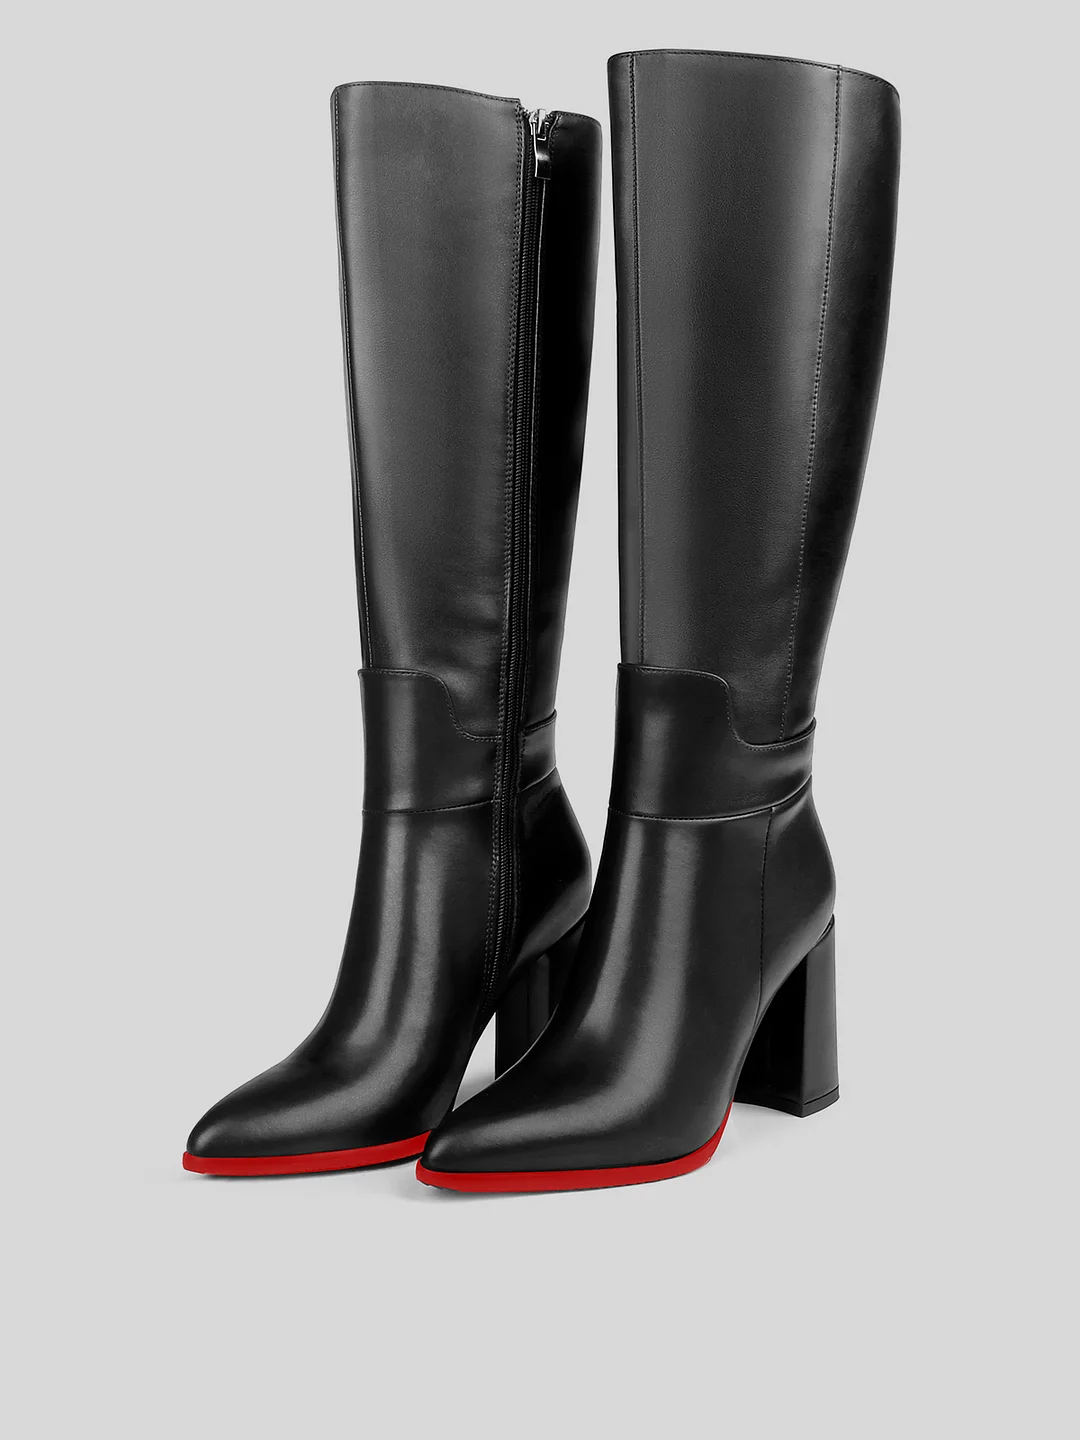 9.5cm/3.75 inch women's  Knee Red Bottom Genuine Leather High Heels  Boots